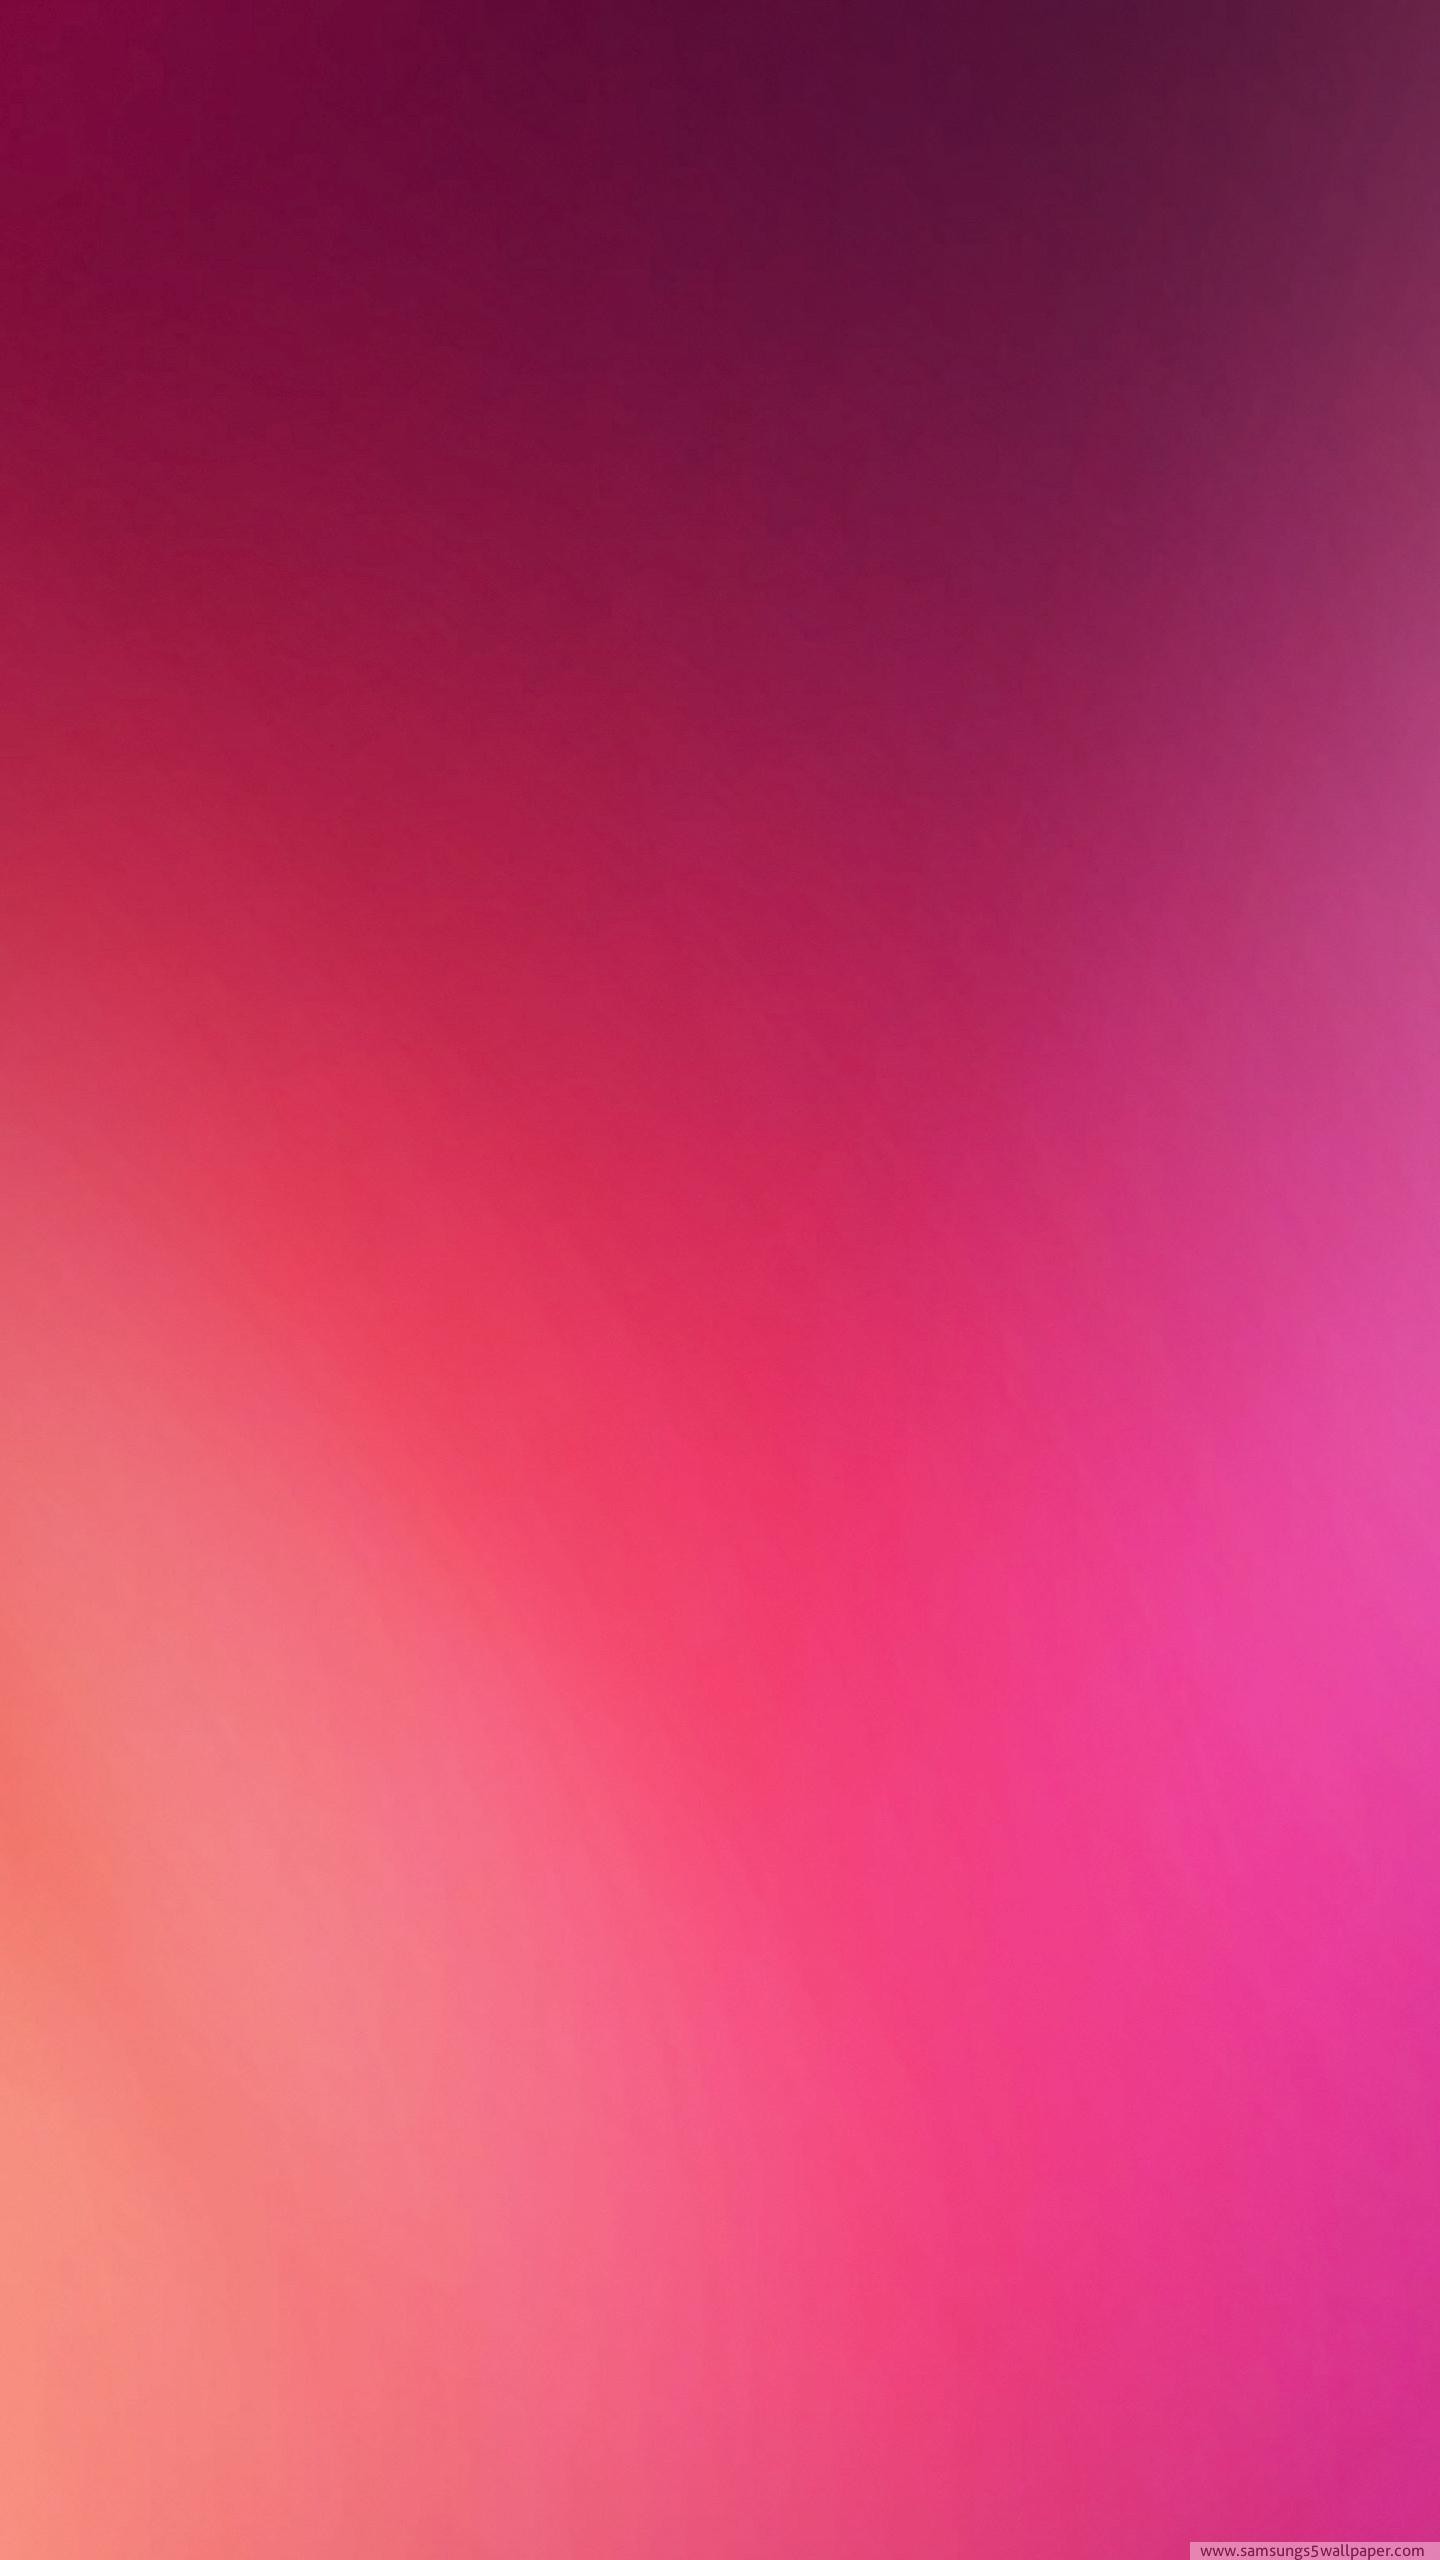 Wallpaper samsung galaxy s6 pink blur awesome